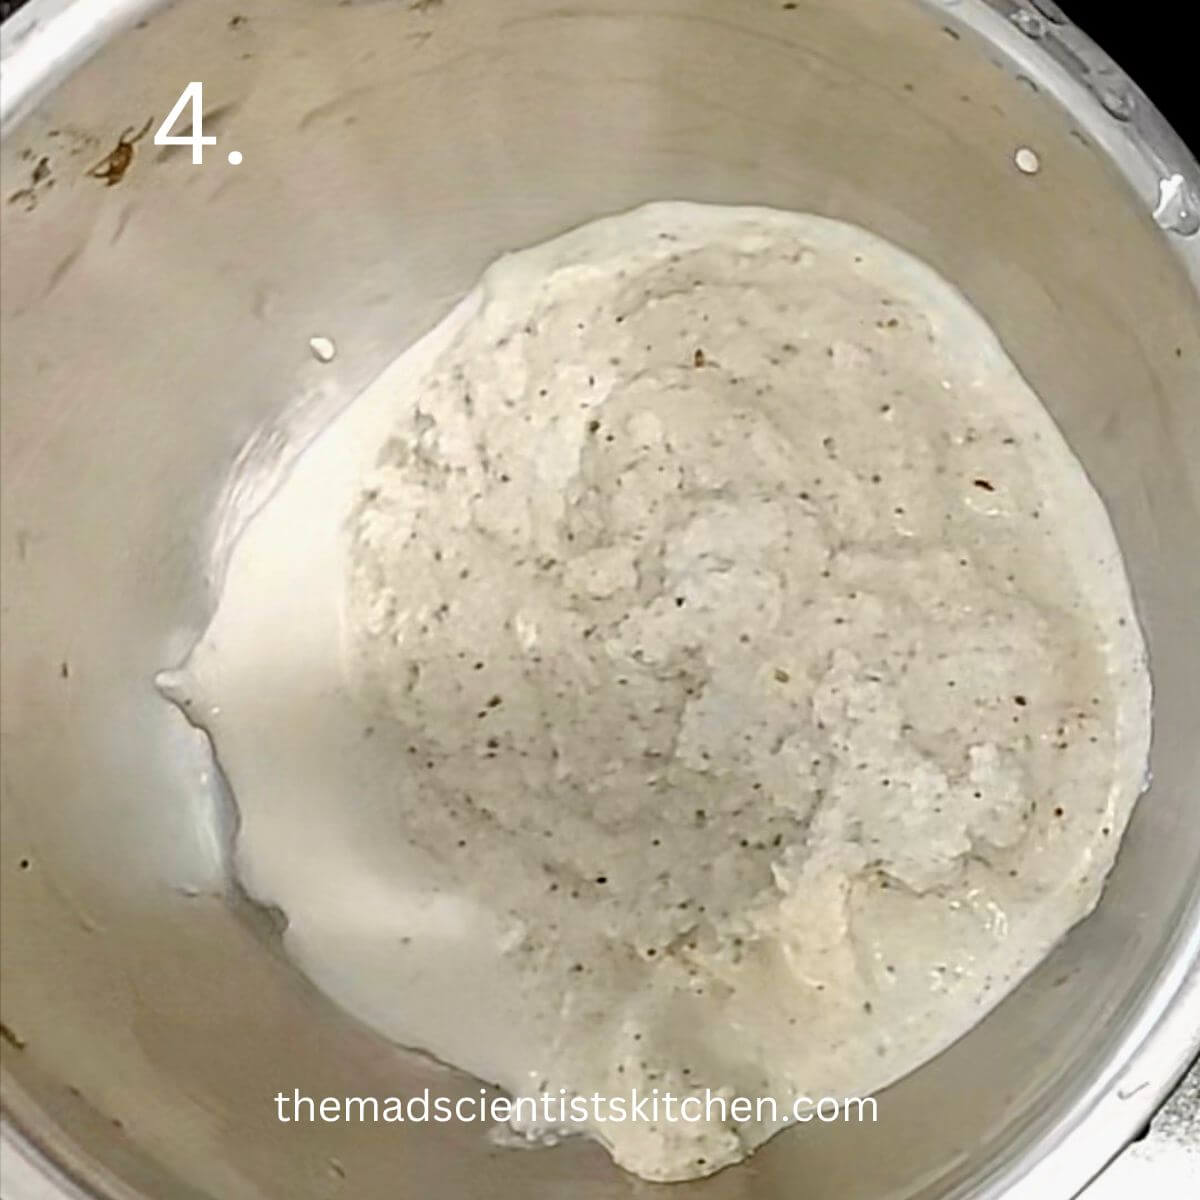 The finely ground coconut mixture for Kalan